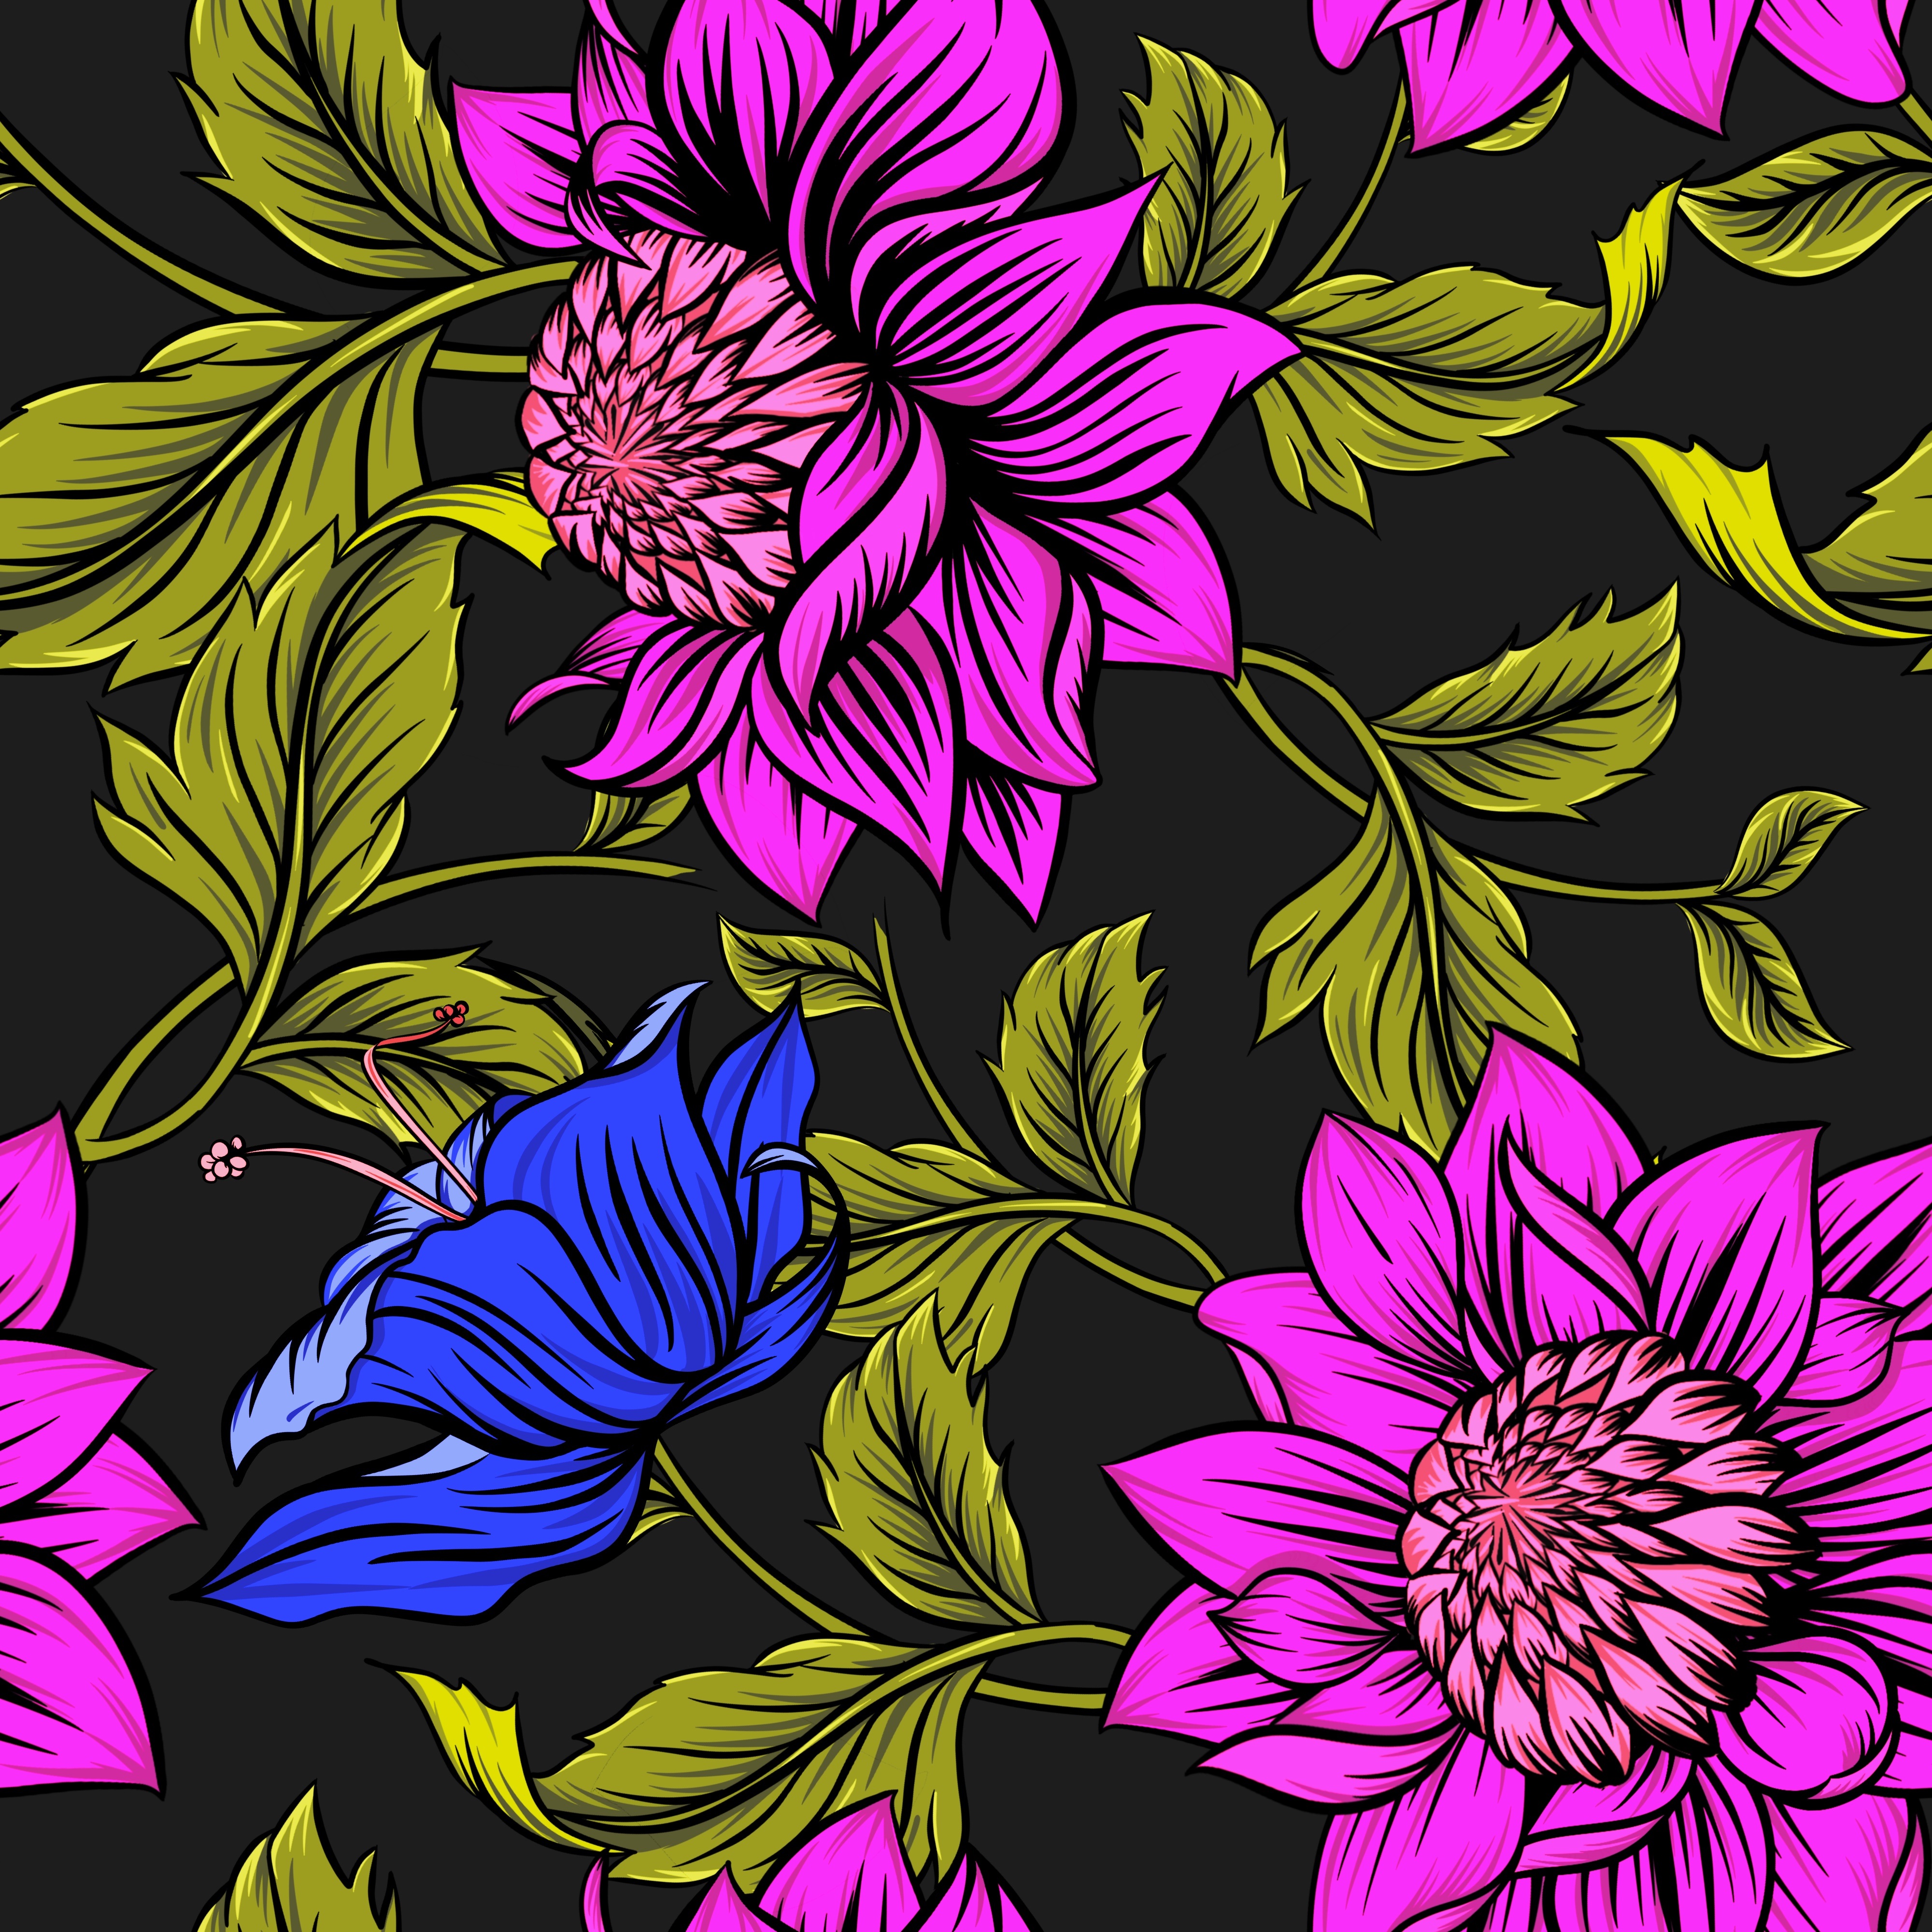 motley, texture, textures, bright, flowers, leaves, patterns, multicolored, petals for android